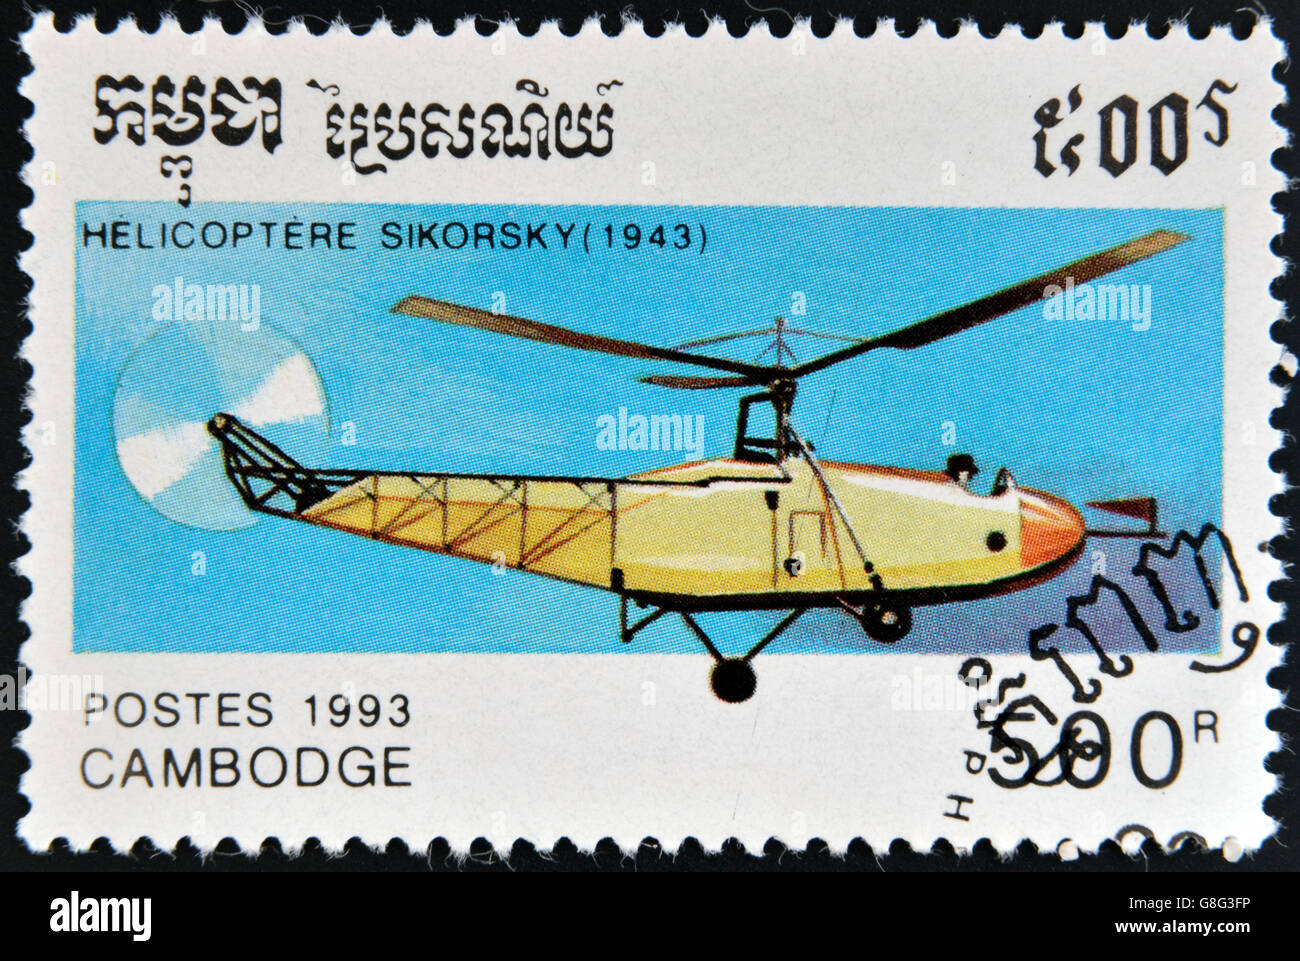 CAMBODIA - CIRCA 1993: A stamp printed in Cambodia shows Sikorsky helicopter (1943), circa 1993 Stock Photo